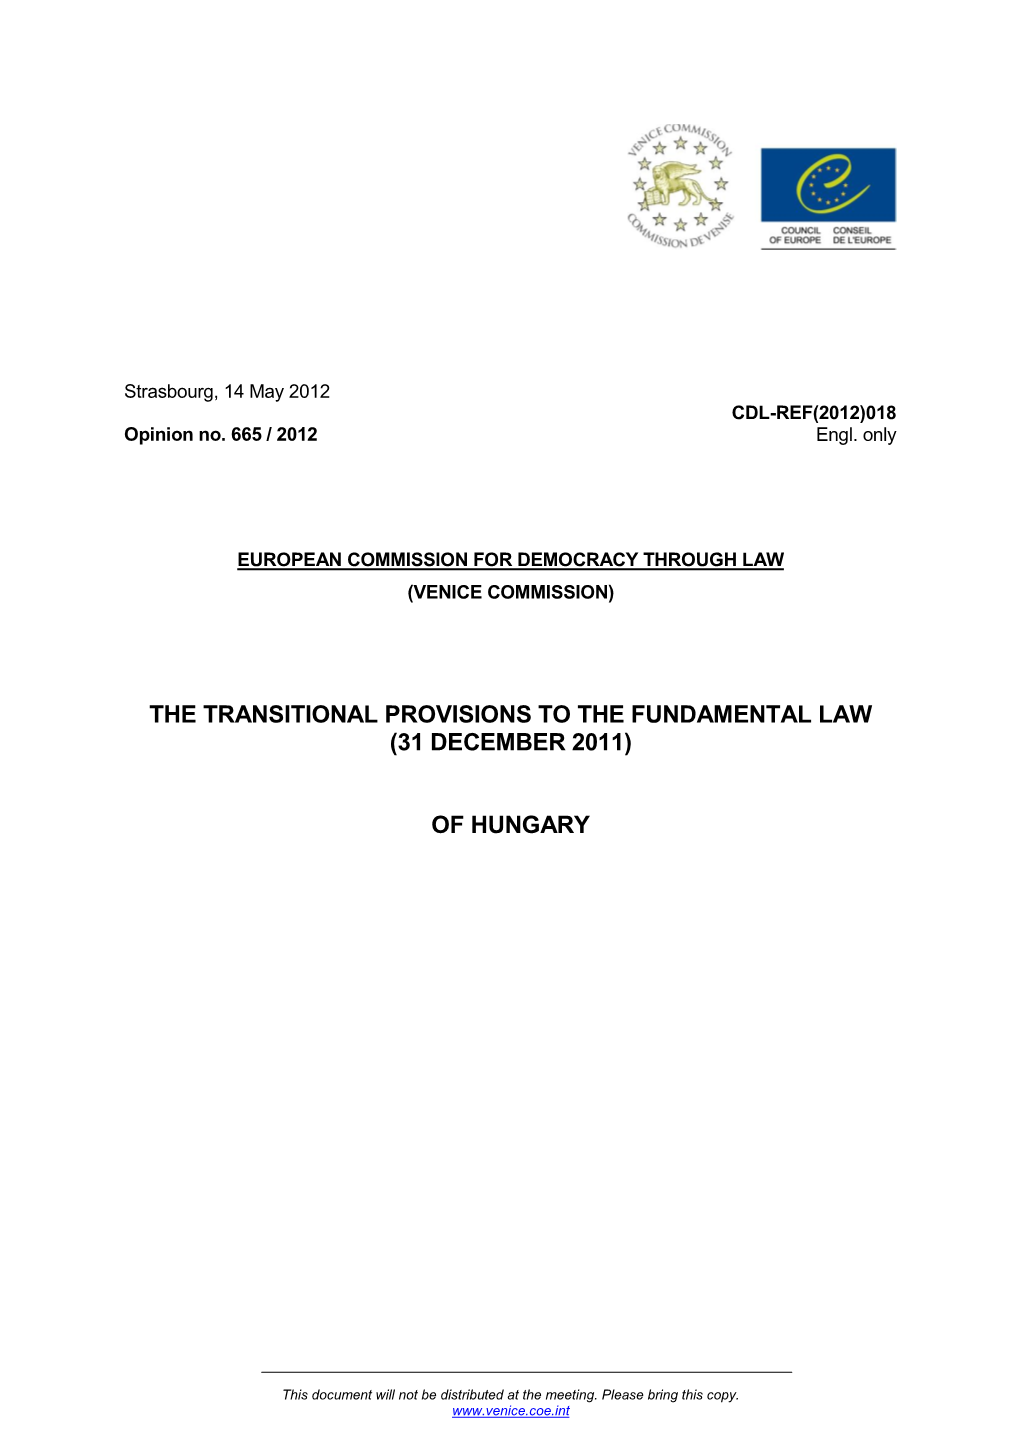 The Transitional Provisions to the Fundamental Law (31 December 2011)